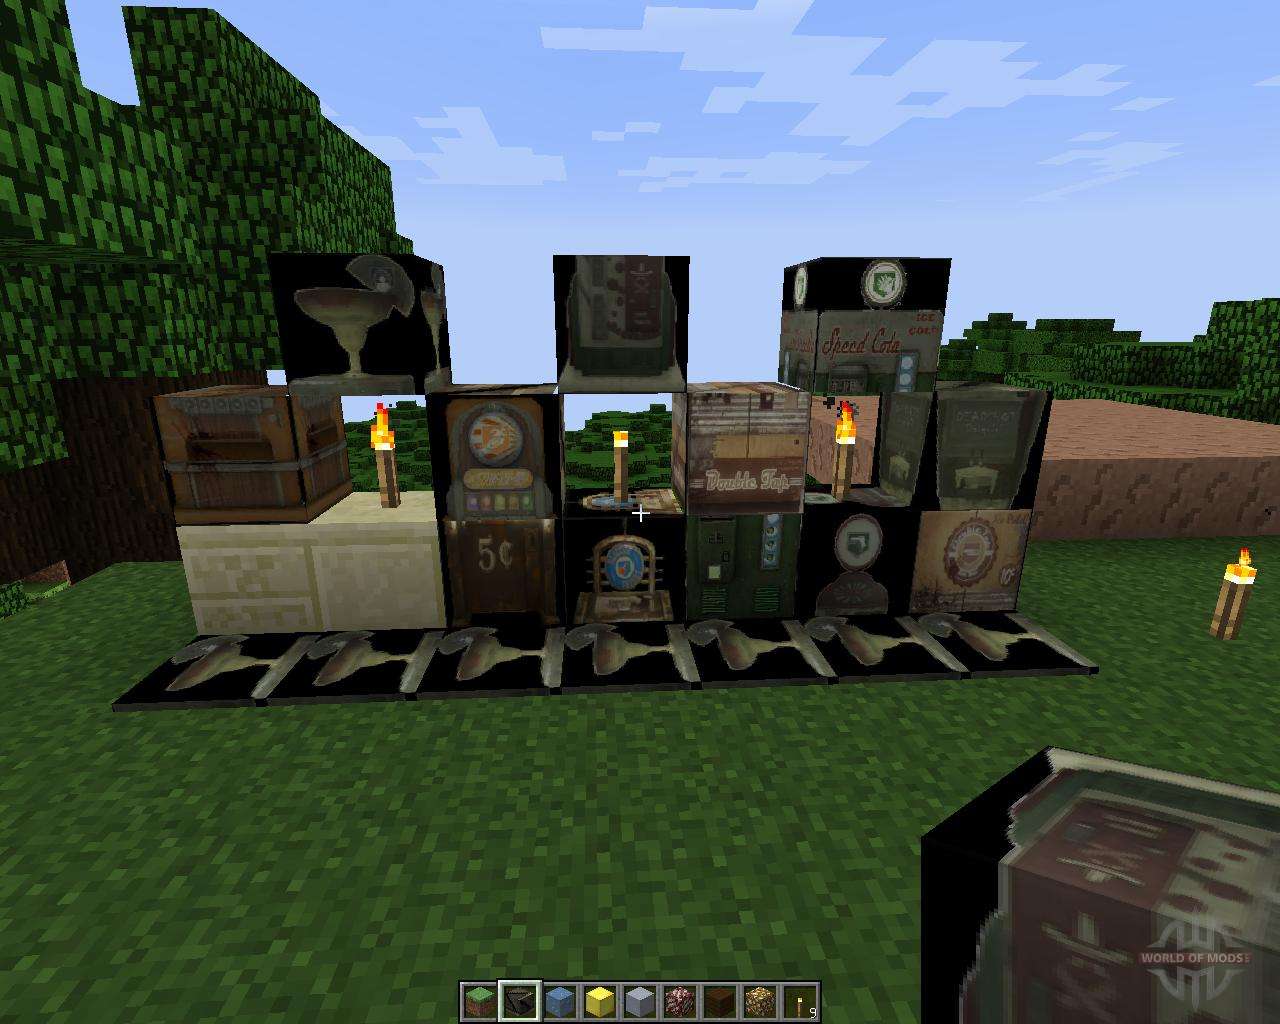 Black ops zombies texture pack [64x][1.7.2] for Minecraft